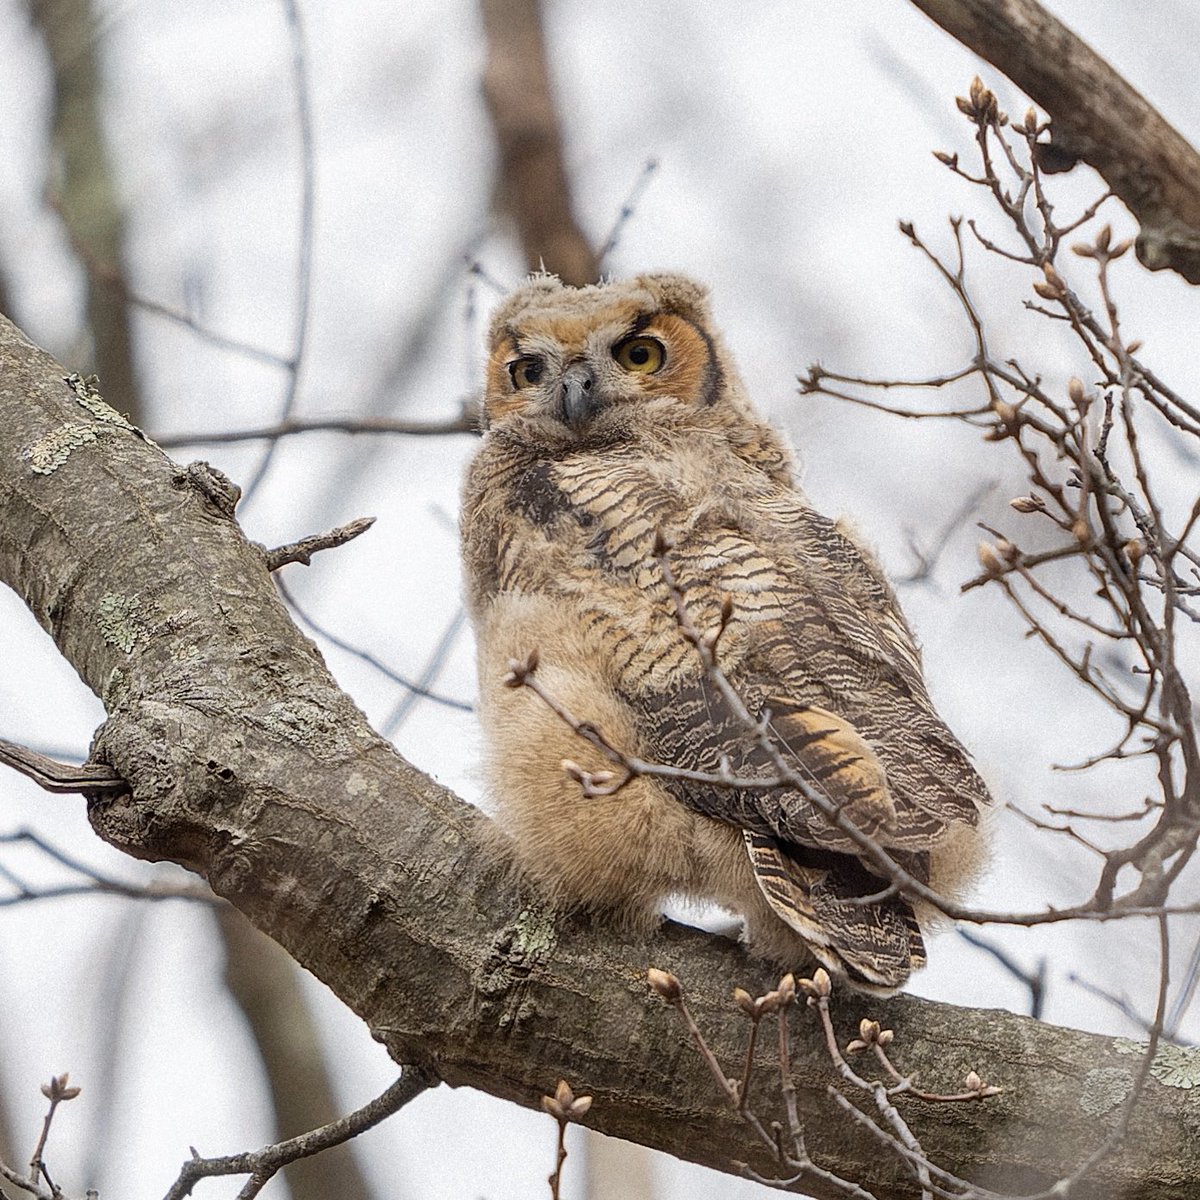 It’s owlet season! One of my favorite times of the year! This Great Horned Owl on Long Island has left the nest and is exploring the park while the parents keep a close watch.💕🦉 #birds #birding